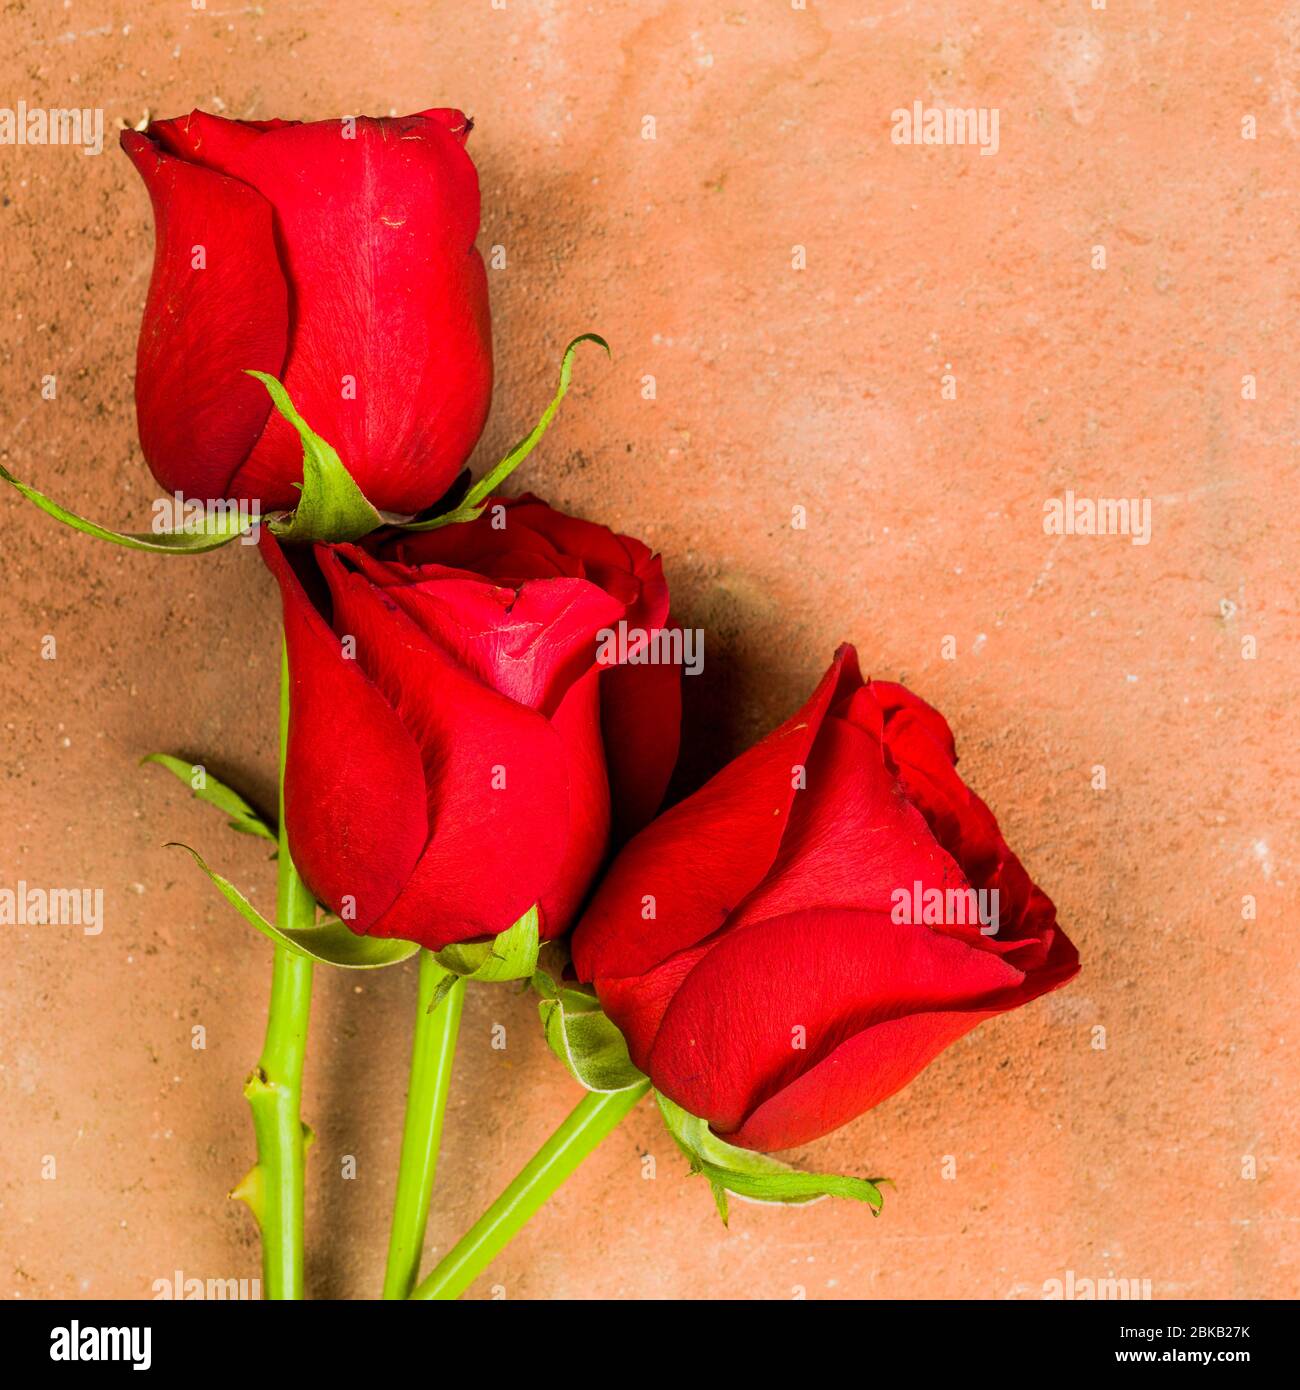 Close Up Of Beautiful Fresh Romantic Red Roses On A Red Tiled Background, With No People And Copy Space Stock Photo